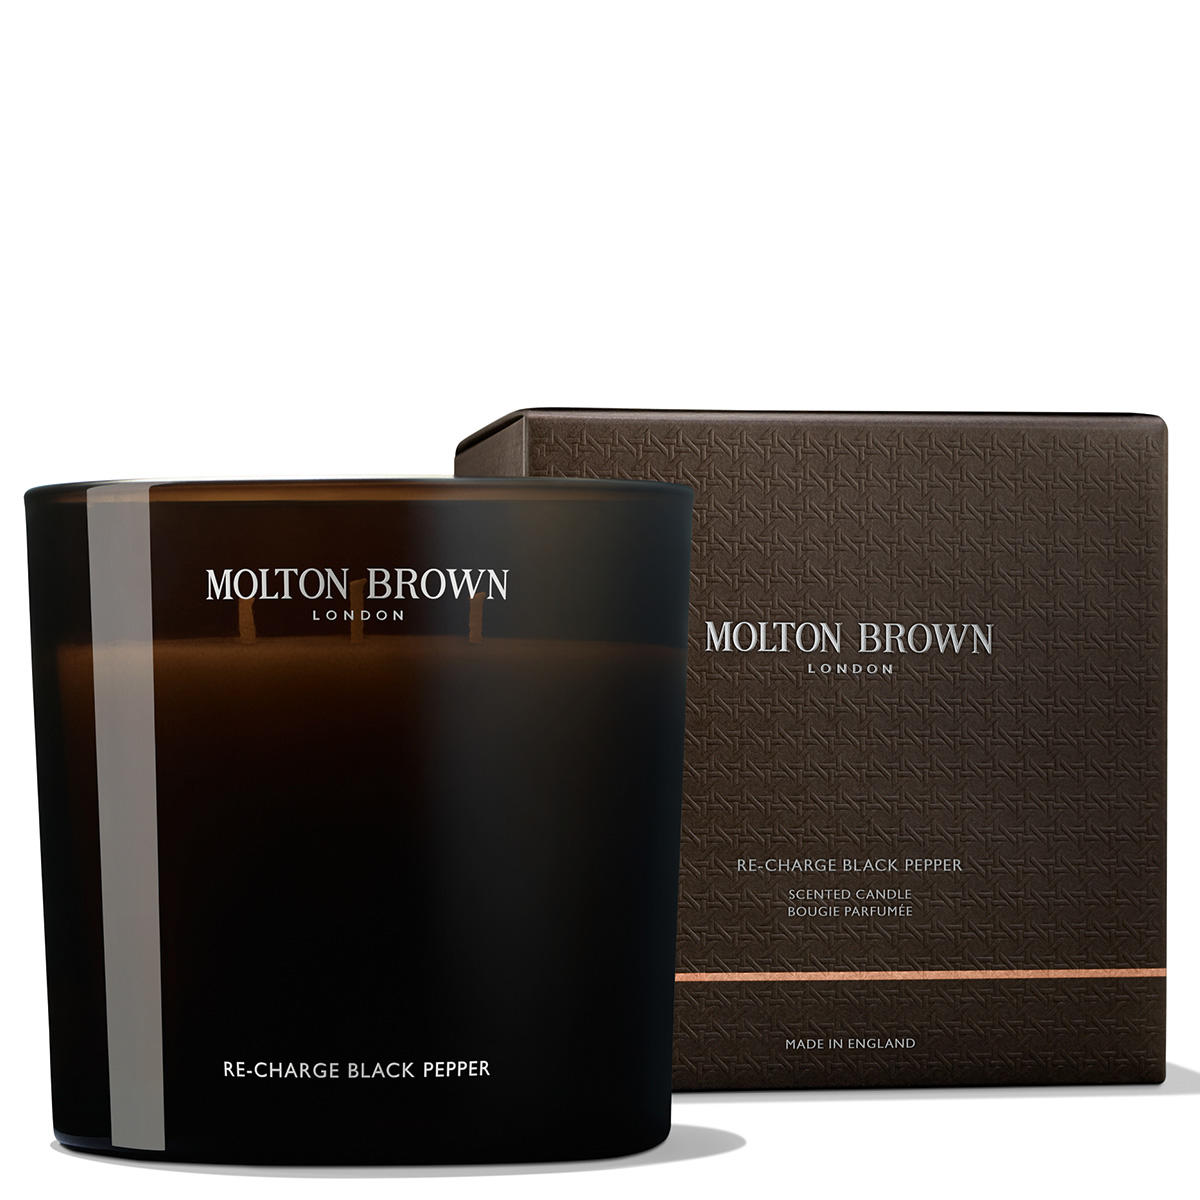 MOLTON BROWN Re-charge Black Pepper Scented Candle 600 g - 1